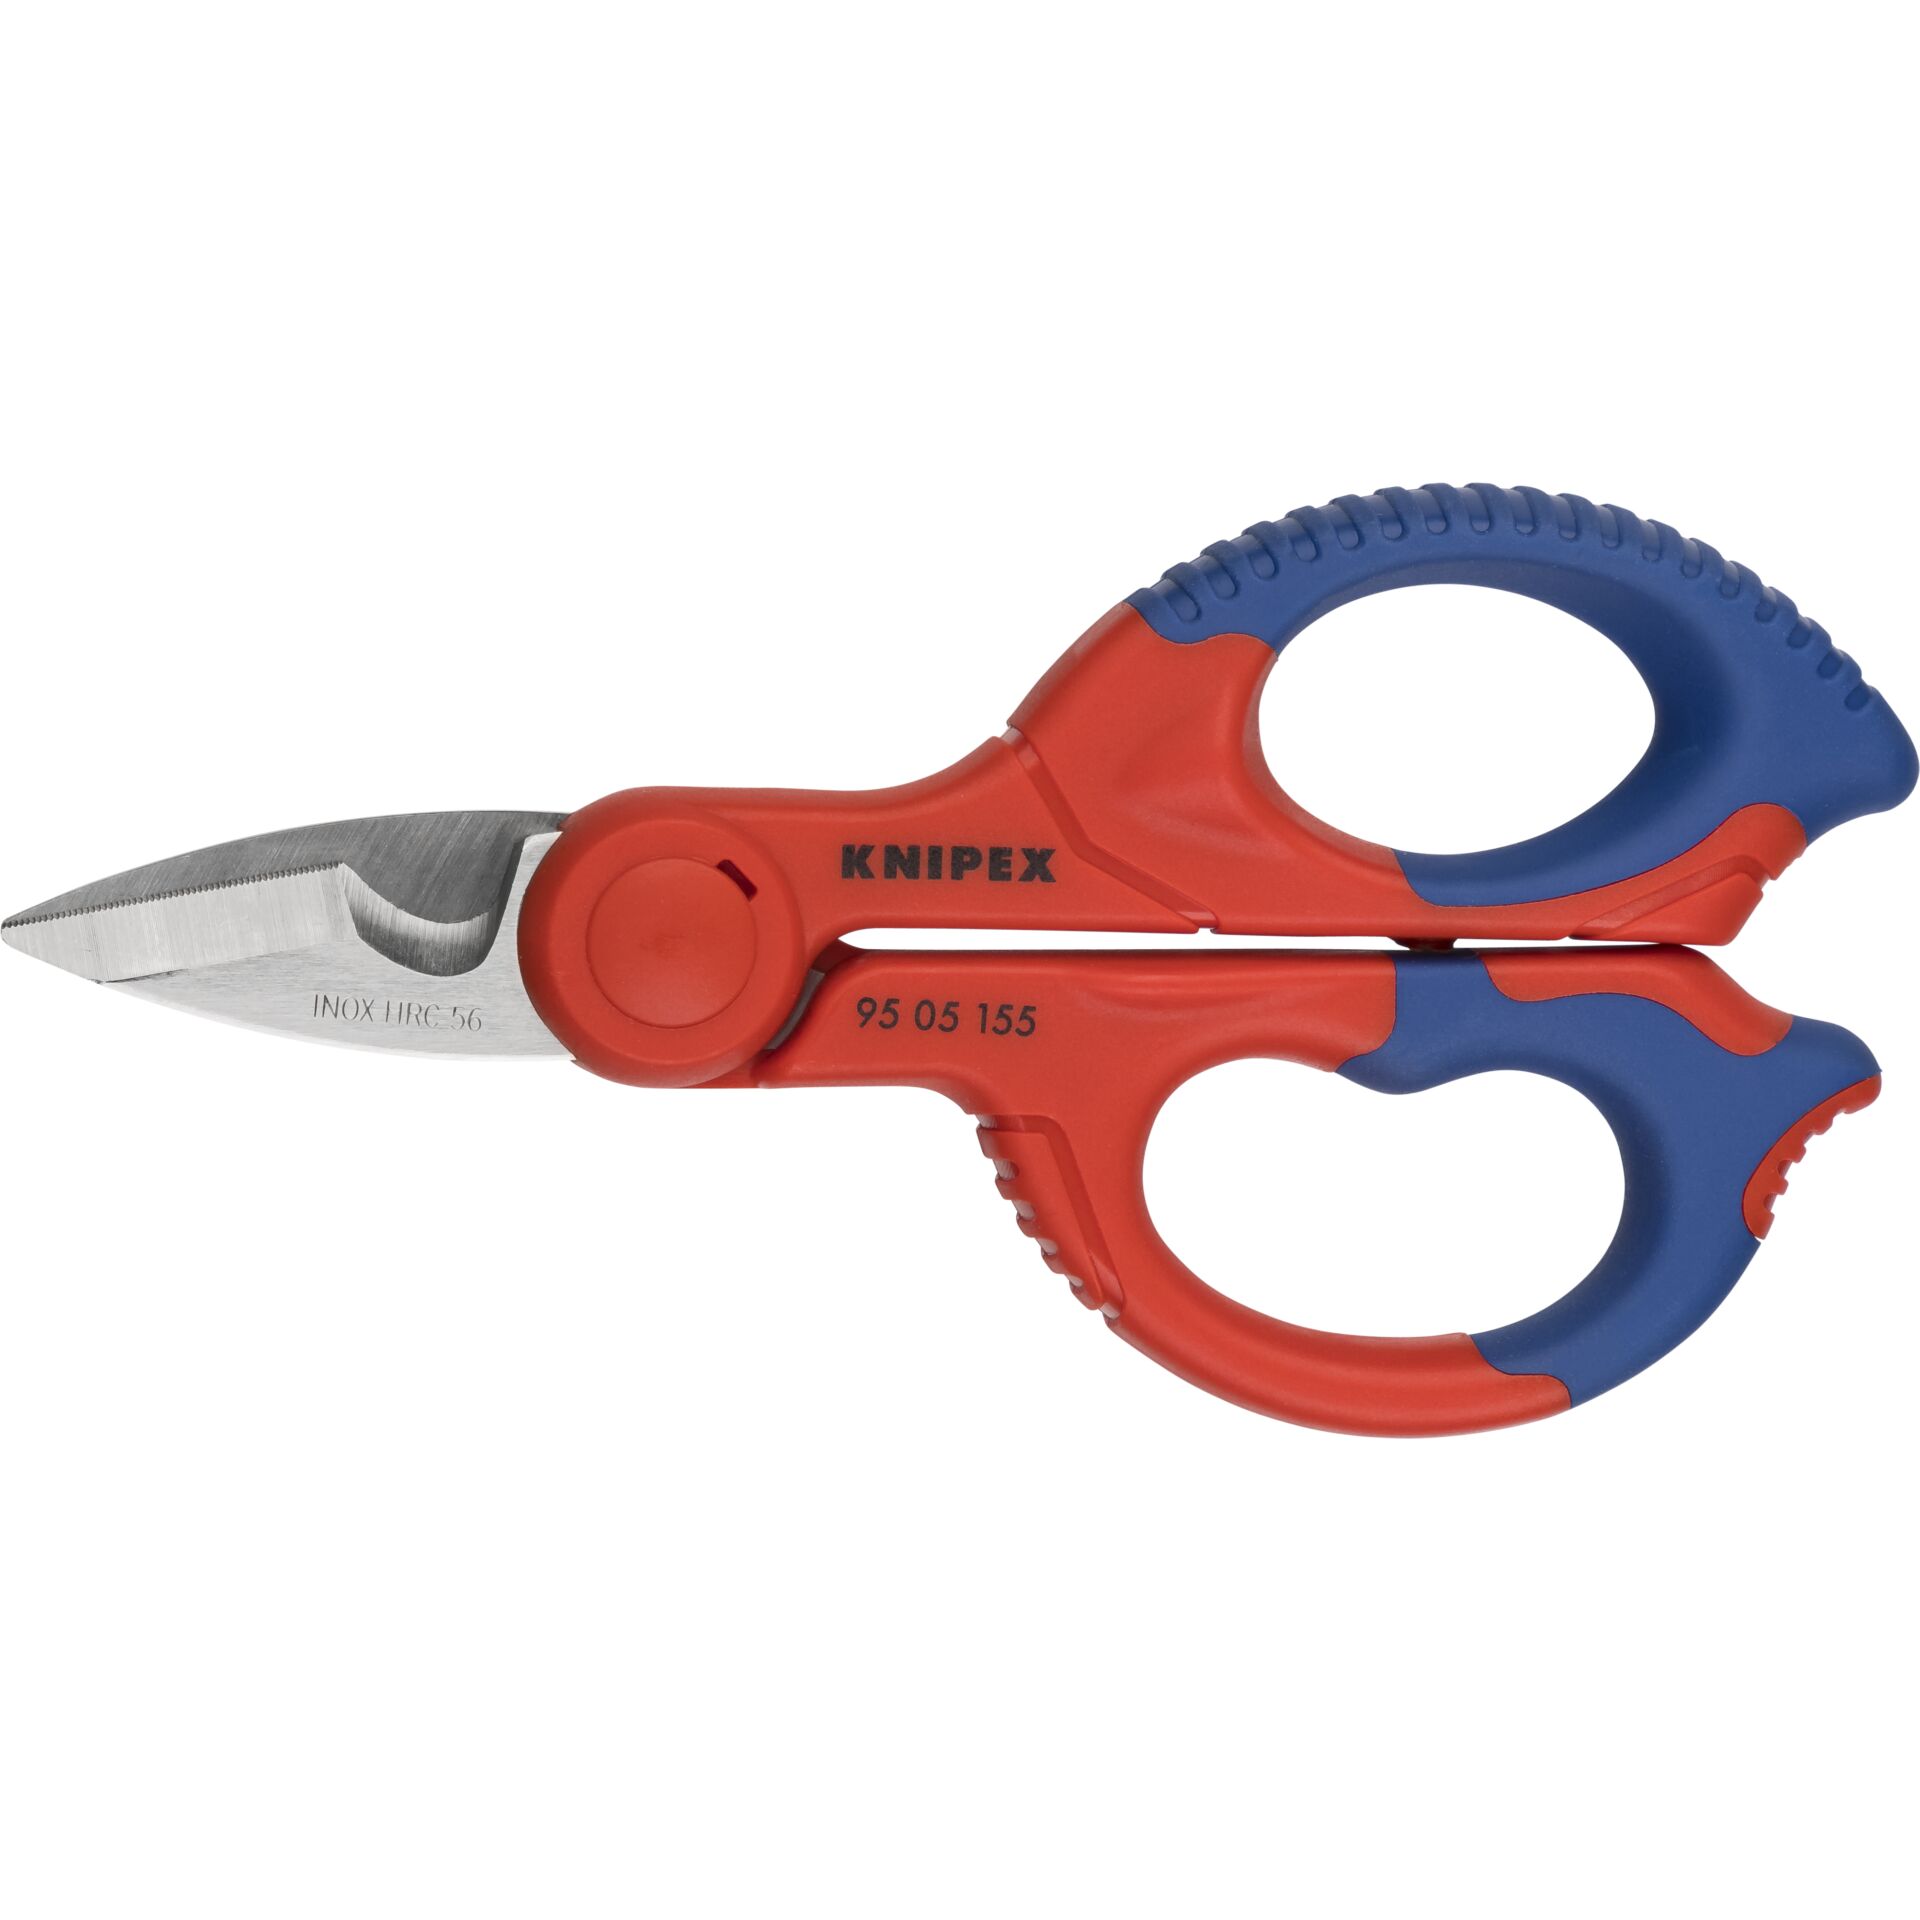 KNIPEX Electricians Shears